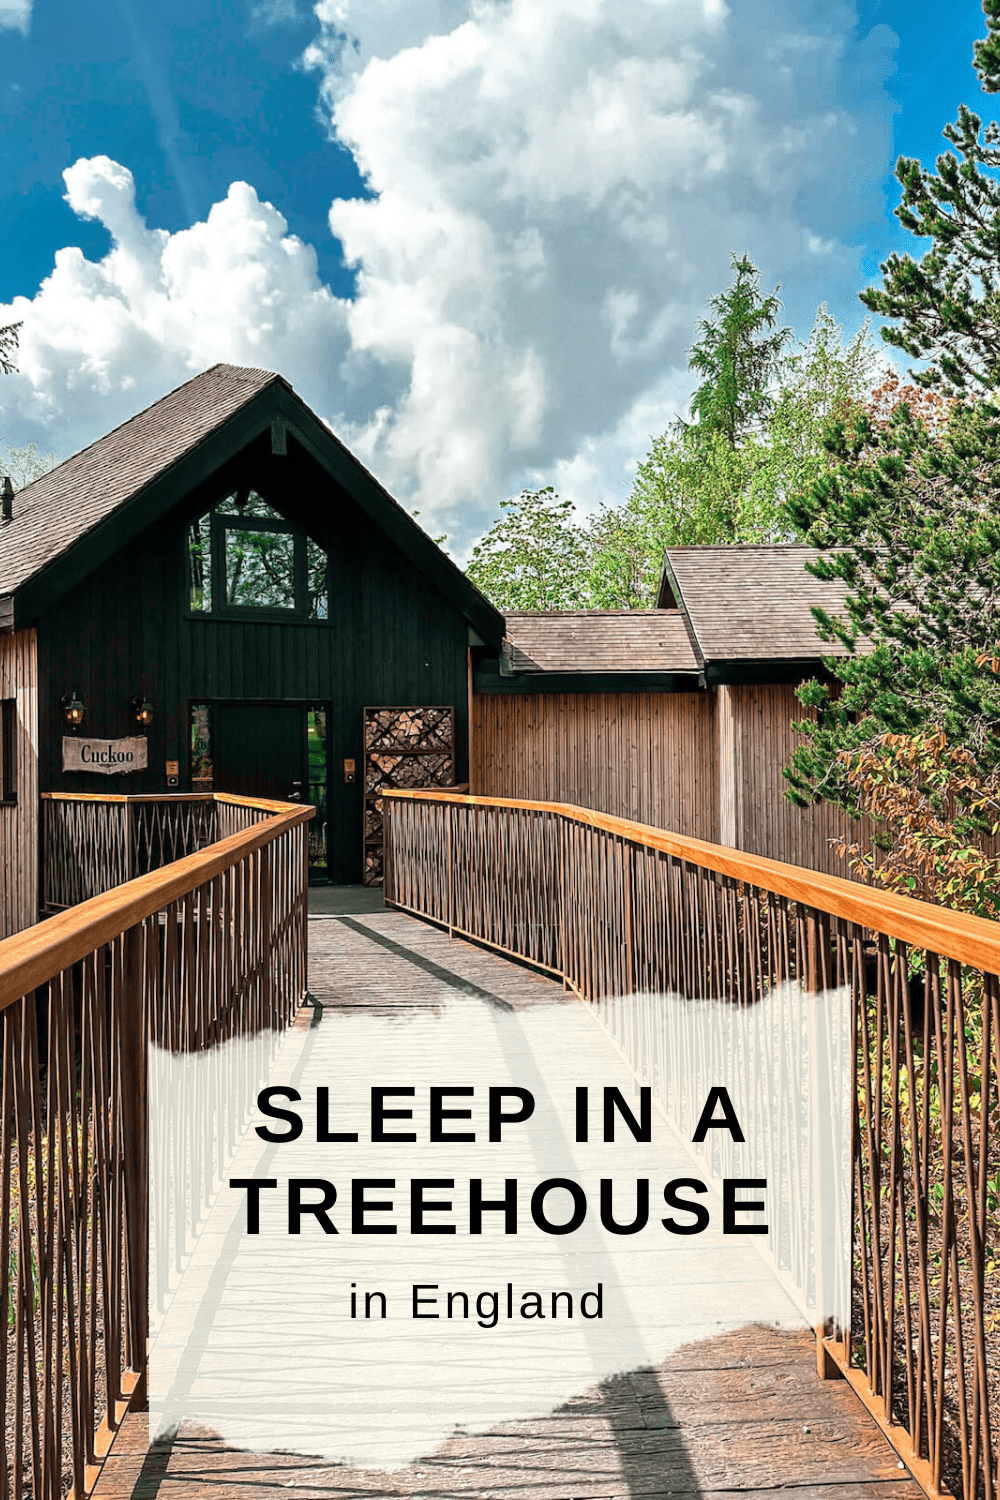 Sleep in a treehouse in the UK